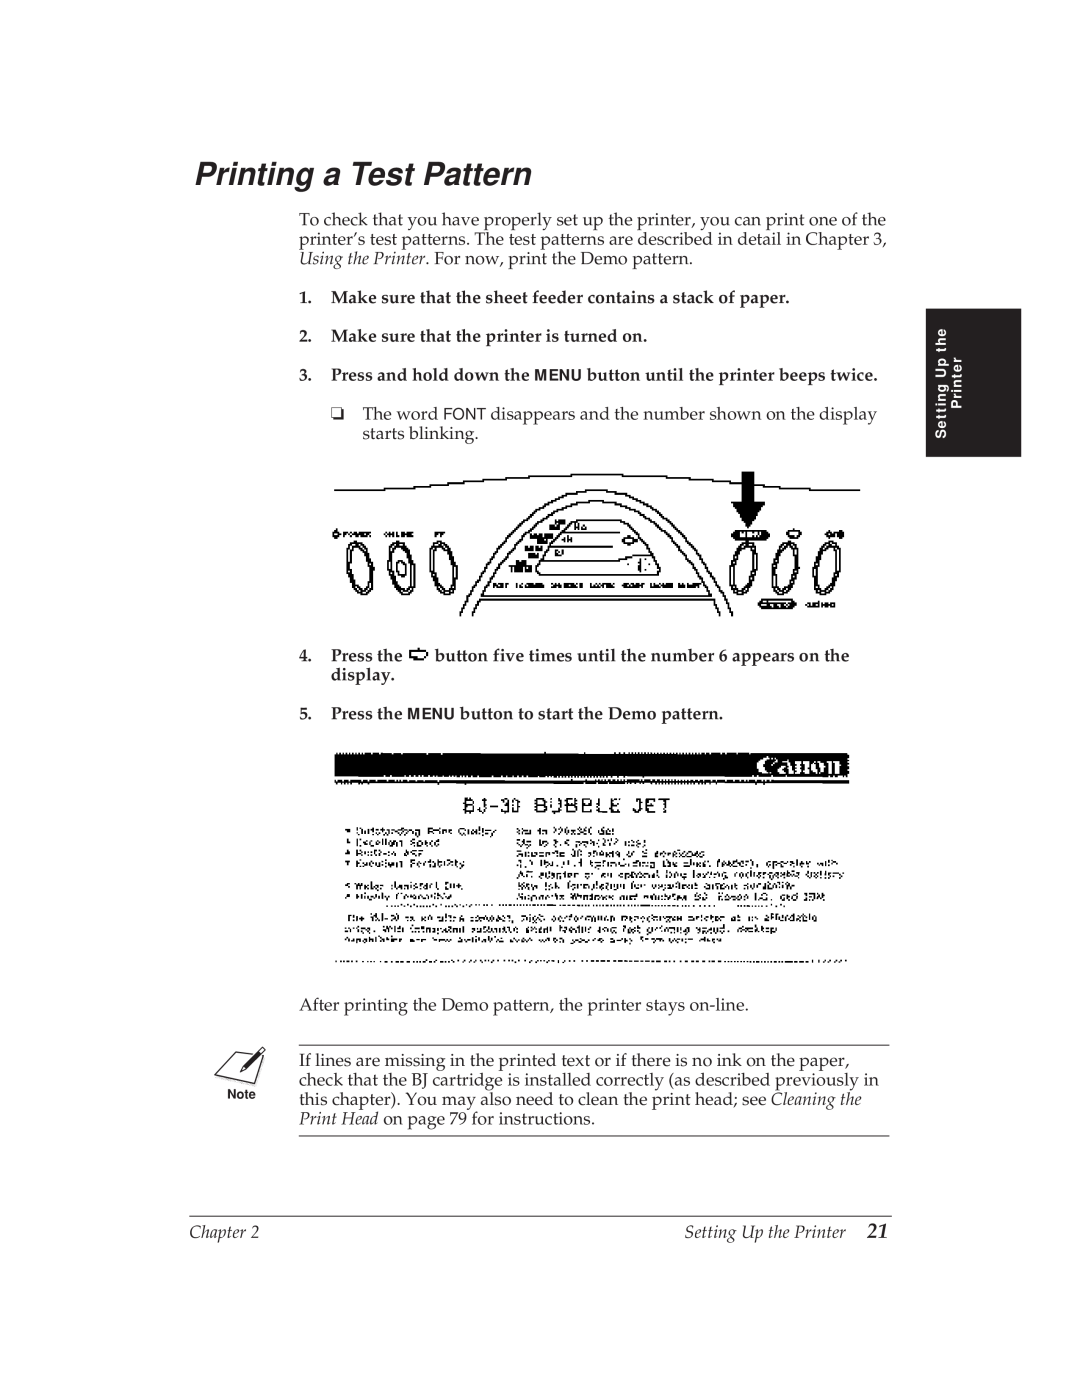 Canon BJ-30 manual Printing a Test Pattern, Make sure that the sheet feeder contains a stack of paper 